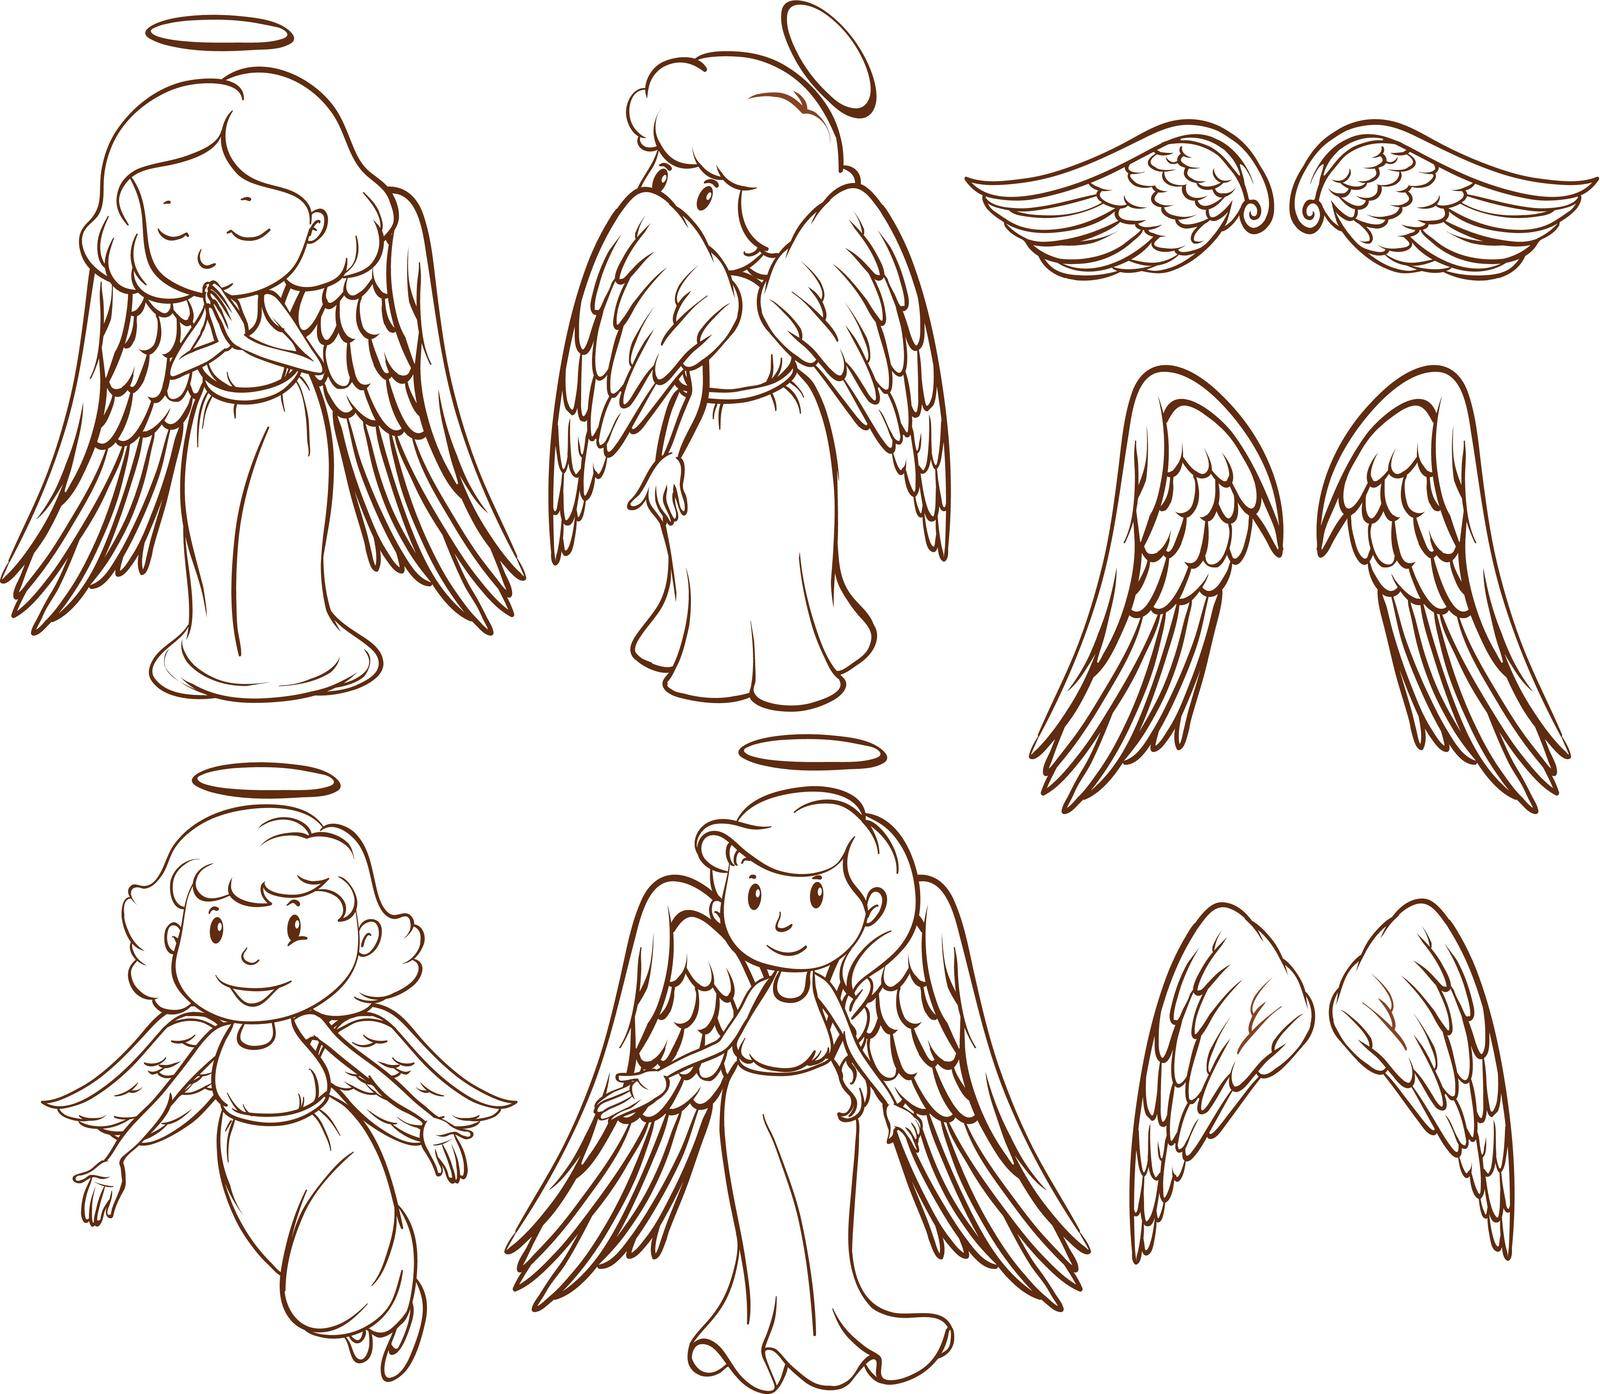 Illustration of different poses of angels